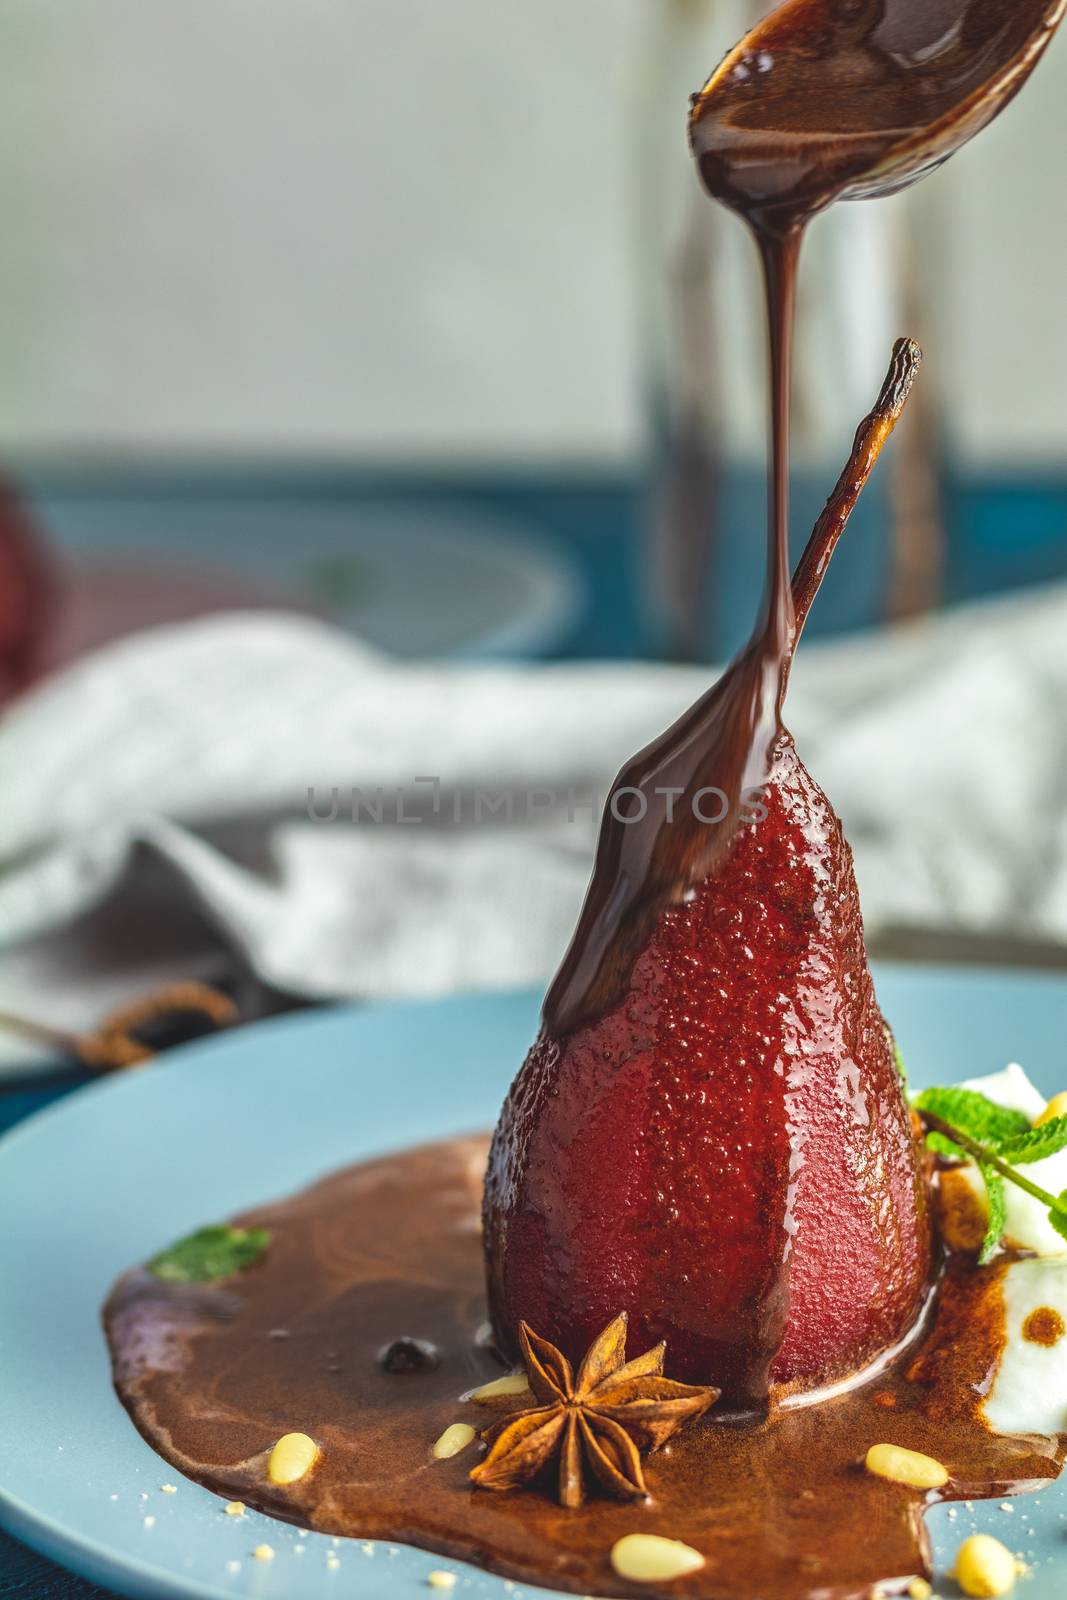 Chocolate sauce pours from a spoon on red pears in wine. Red pears are in a blue plate. The concept of still life on blue concrete surface.